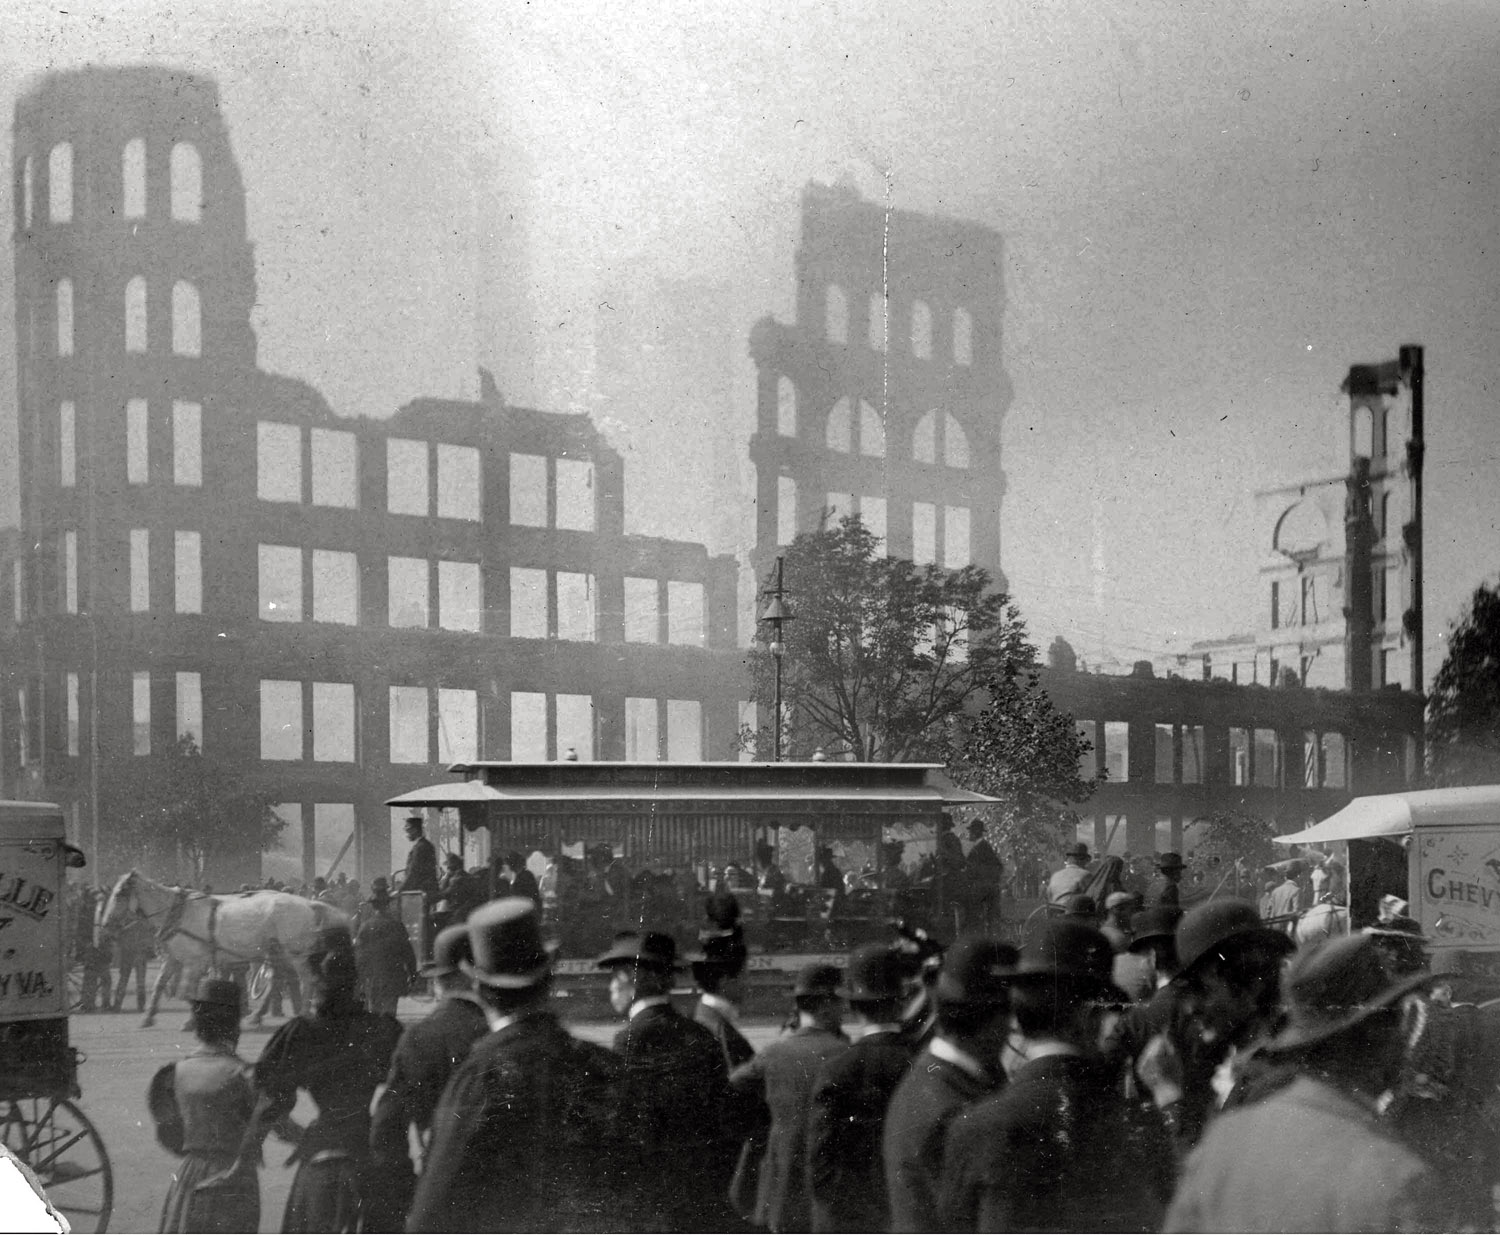 From a turn-of-the-century family photo album. Taken in Washington, D.C. [This is might be the Baltimore fire of 1904. Prints were sold as souvenirs in various cities. There were also a few big fires in Arlington, Virginia, around that time. But none in Washington that I know of. - Dave] View full size.